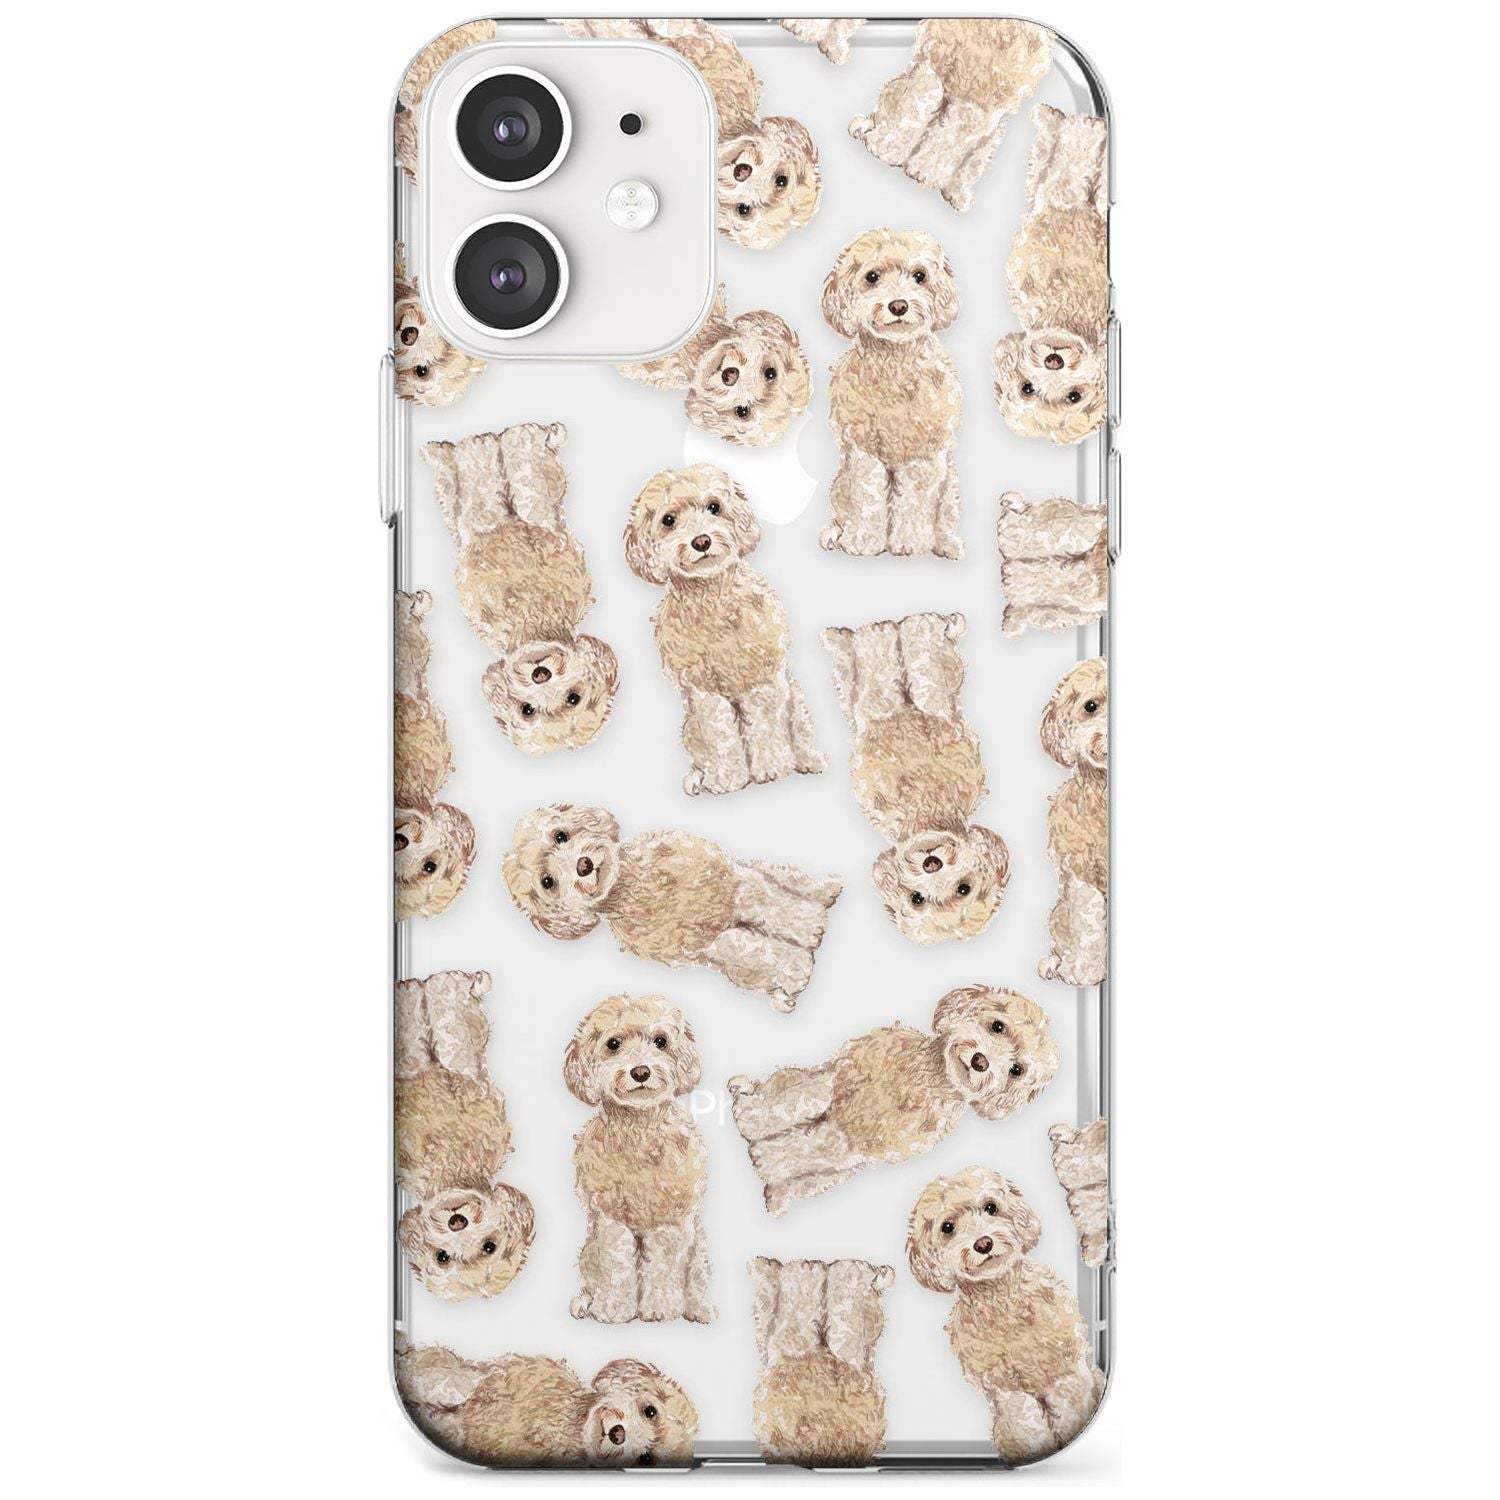 Cockapoo (Champagne) Watercolour Dog Pattern Slim TPU Phone Case for iPhone 11